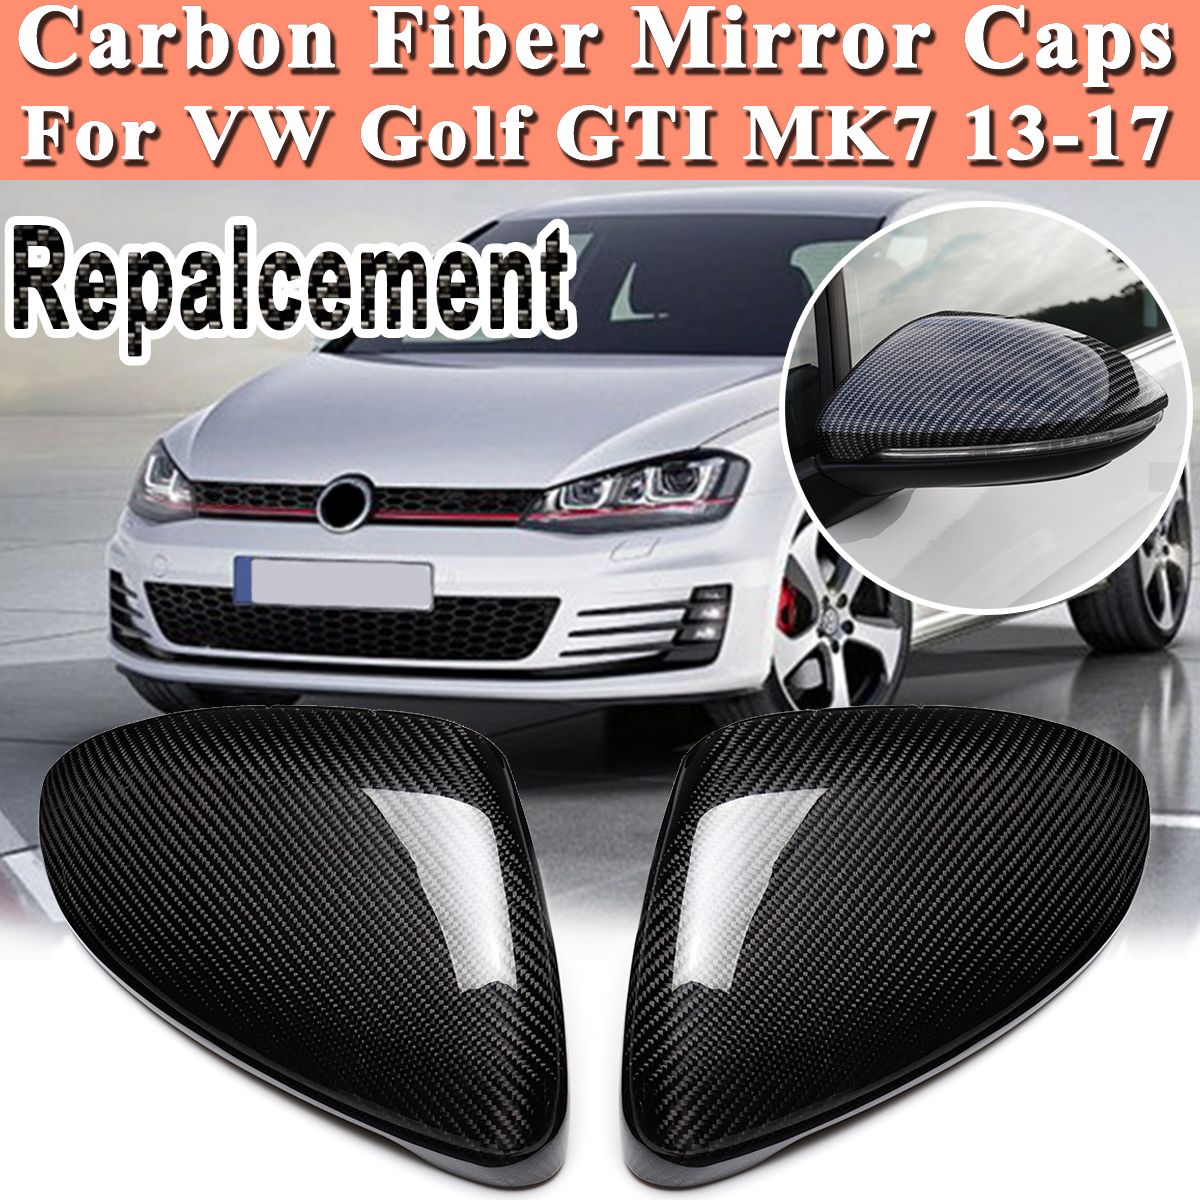 Carbon-Fiber-Door-Side-Car-Mirror-Replacement-Cover-Caps-for-VW-Golf-GTI-MK7-2013-17-1298376